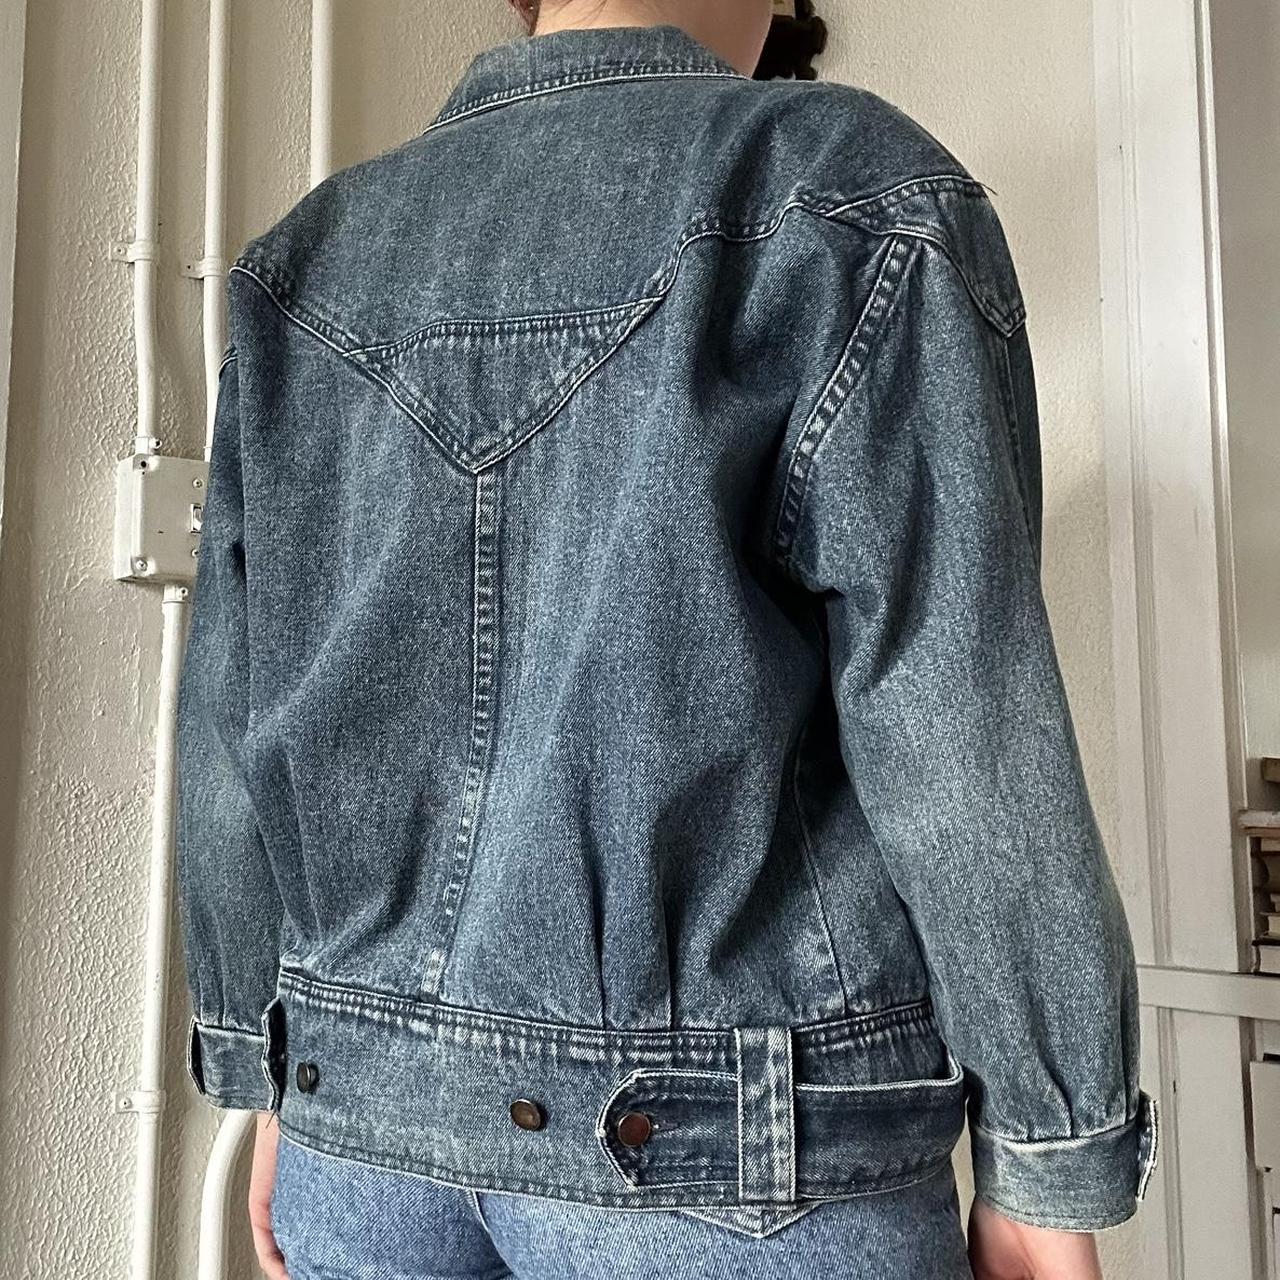 American Vintage Women's Navy and Blue Jacket (3)